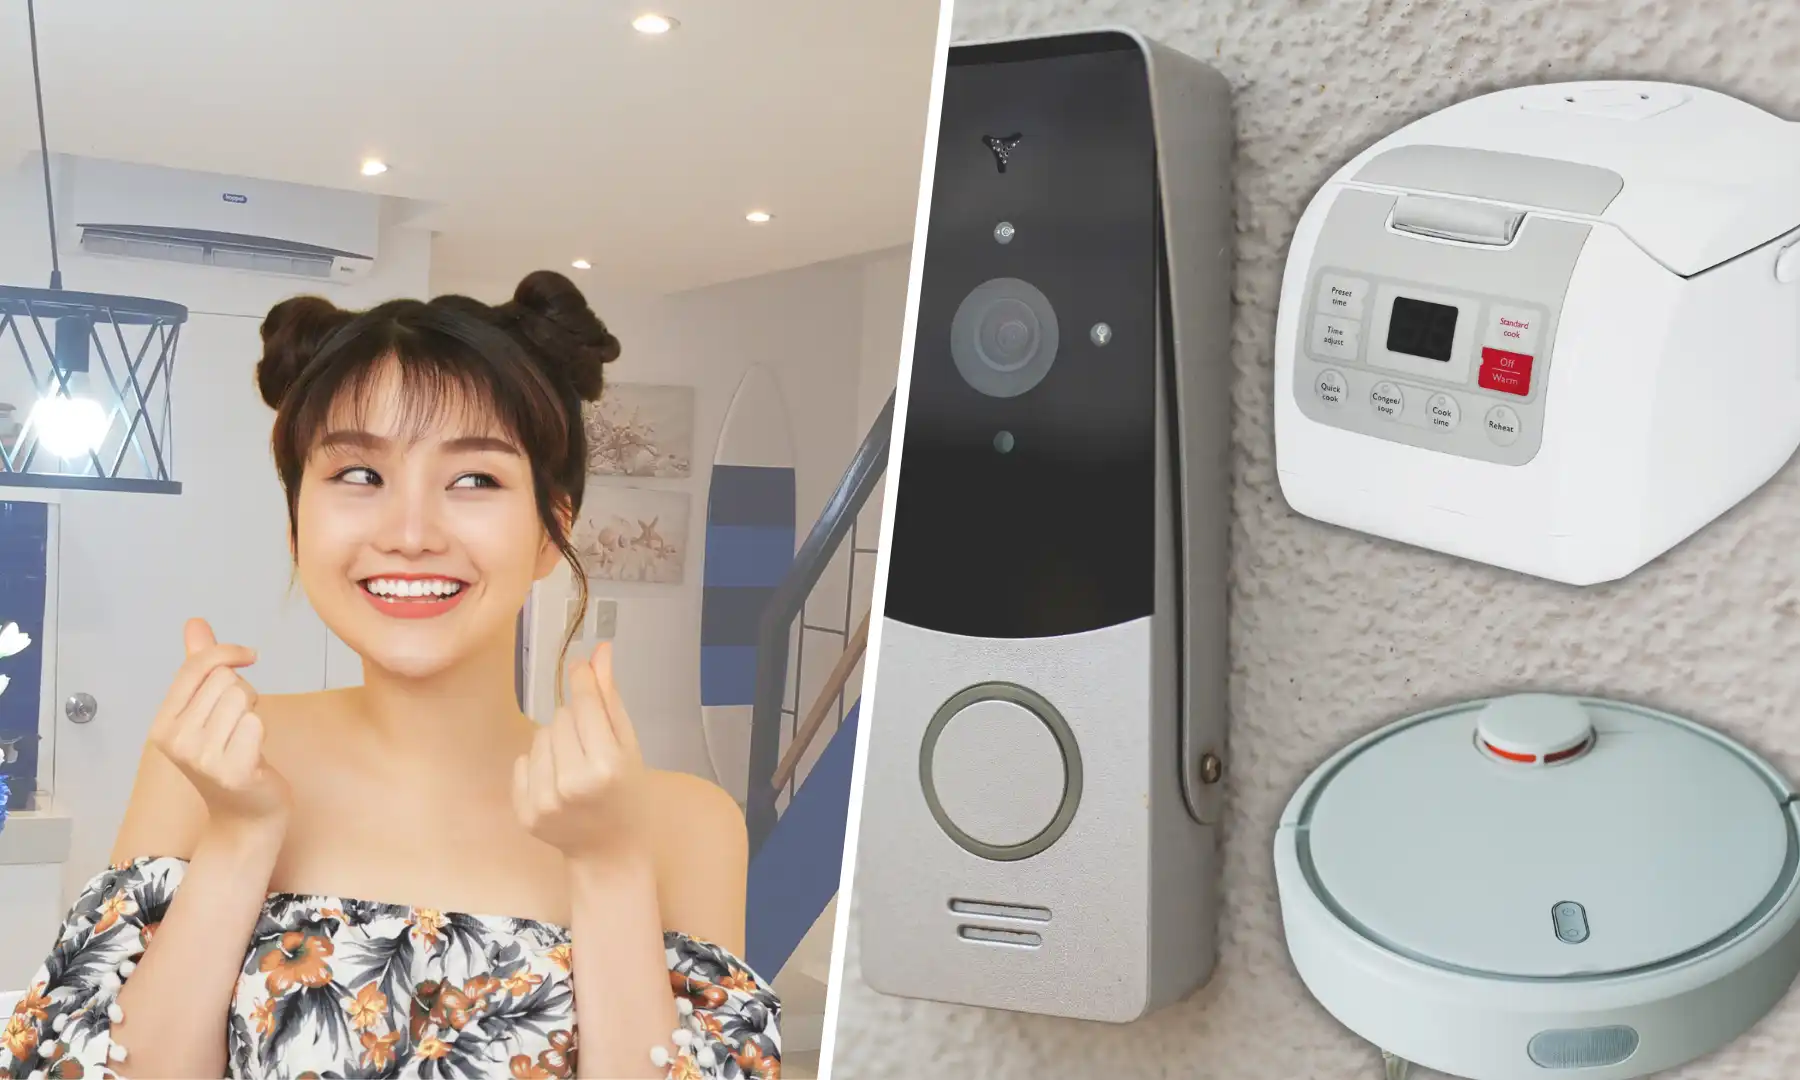 5 K-Drama Smart Devices to Buy for your House